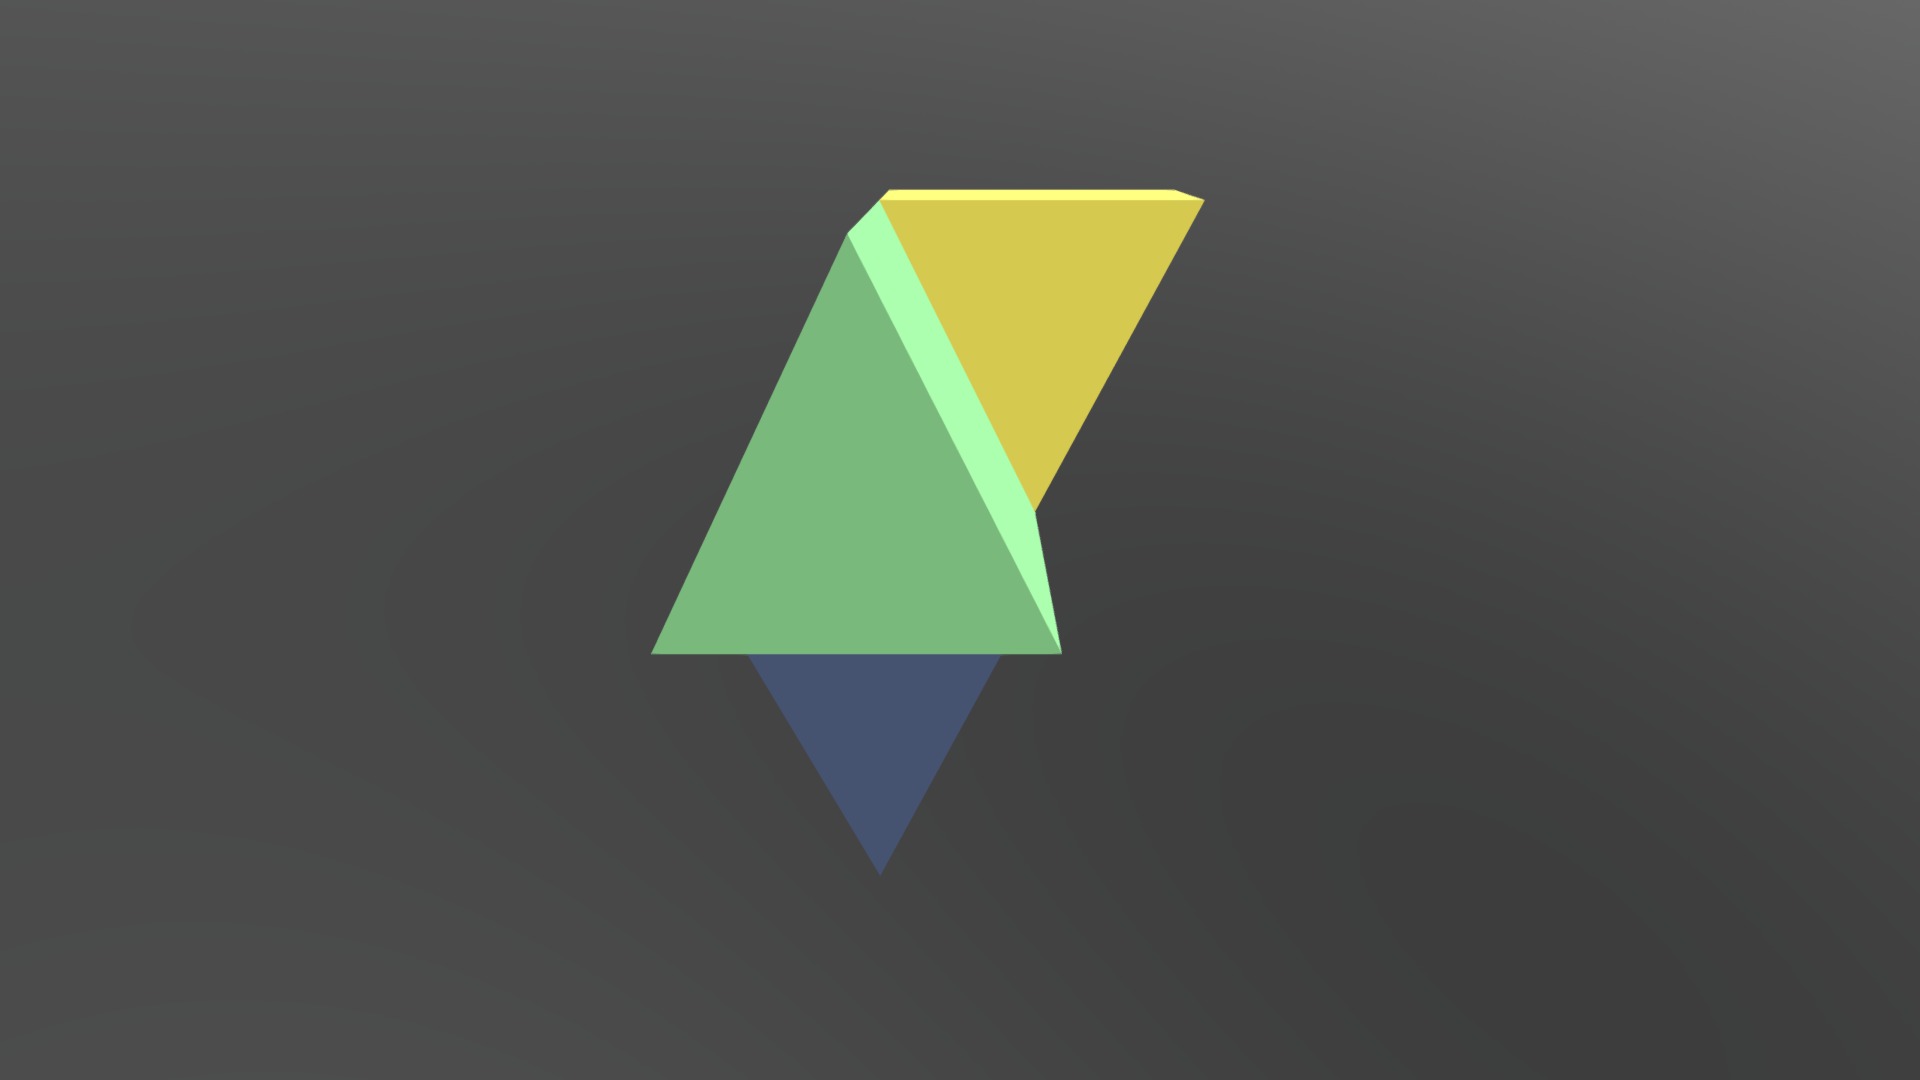 3D model 21 - This is a 3D model of the 21. The 3D model is about a logo with a yellow triangle.